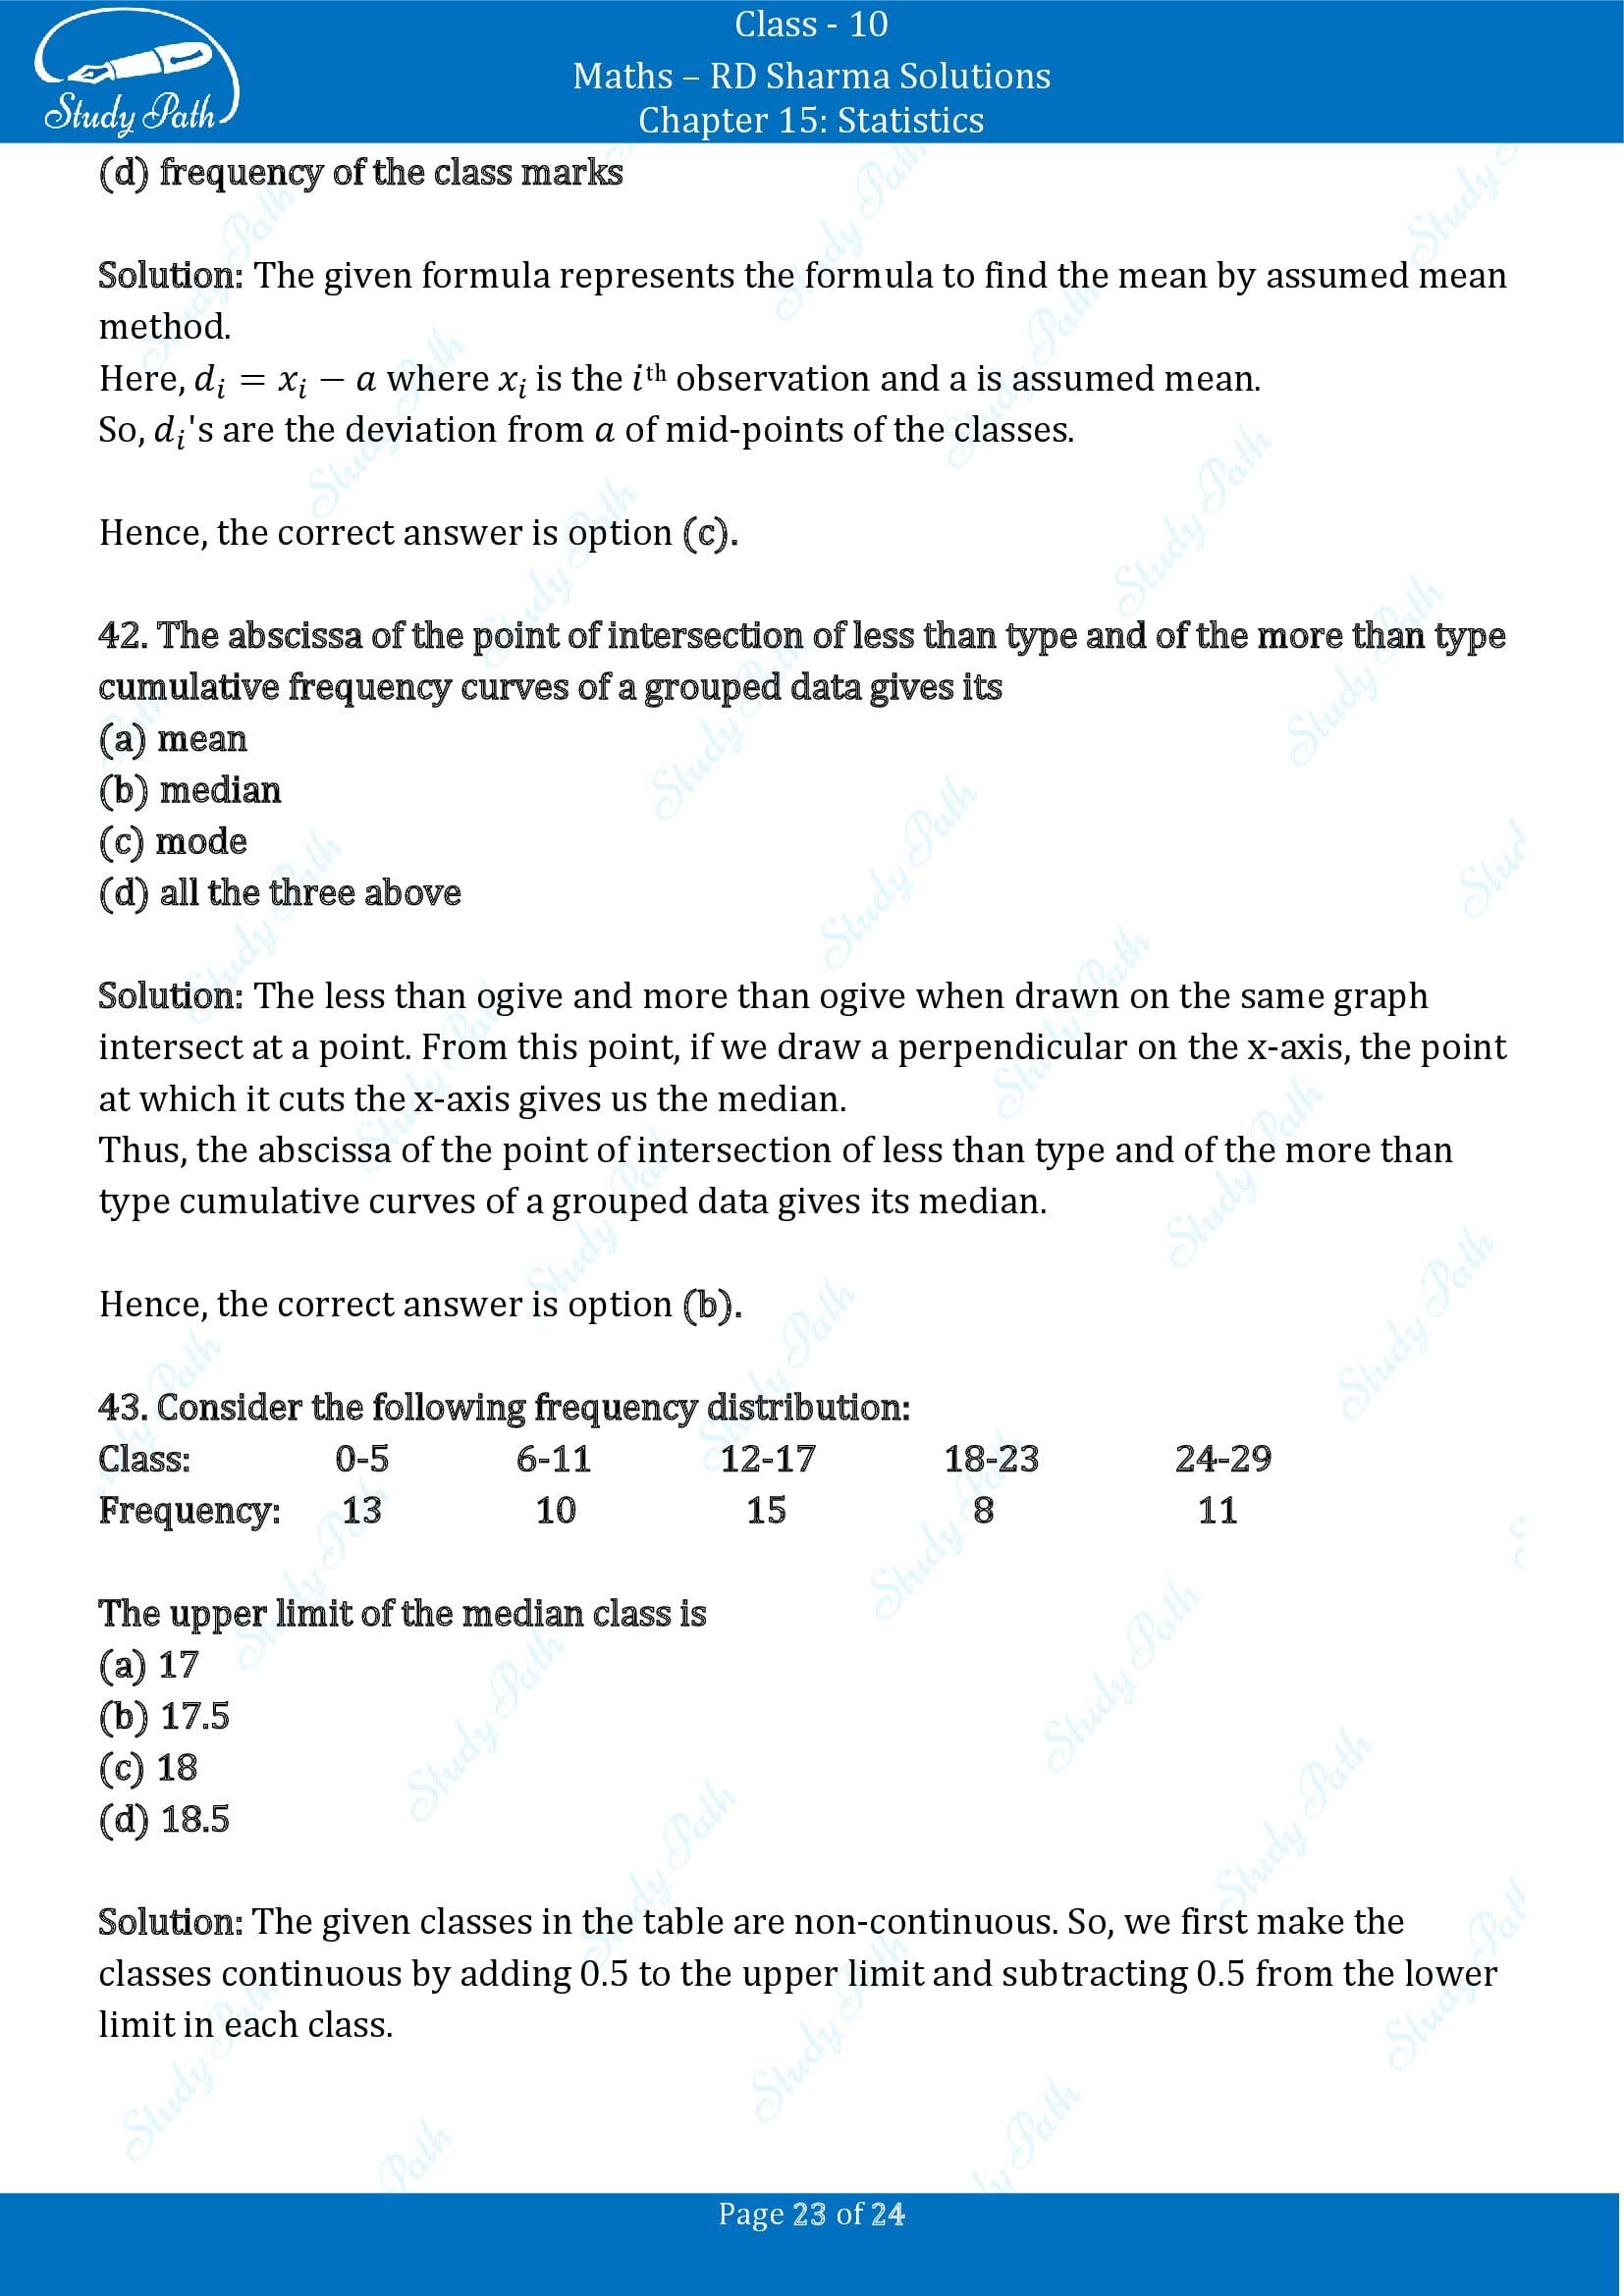 RD Sharma Solutions Class 10 Chapter 15 Statistics Multiple Choice Question MCQs 00023